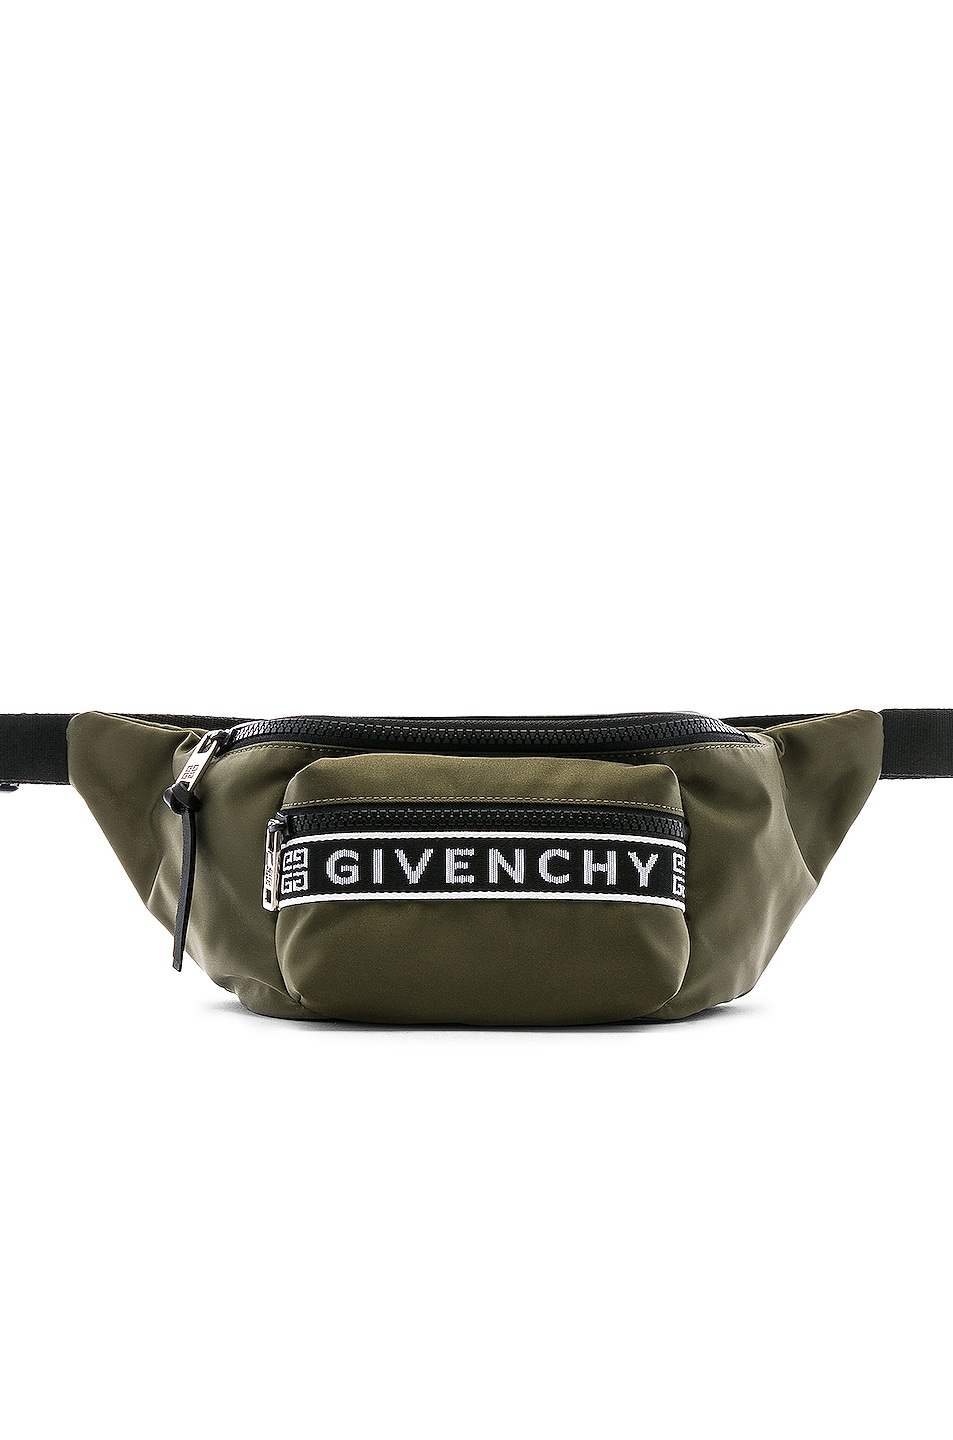 Image 1 of Givenchy Light 3 Bum Bag in Khaki